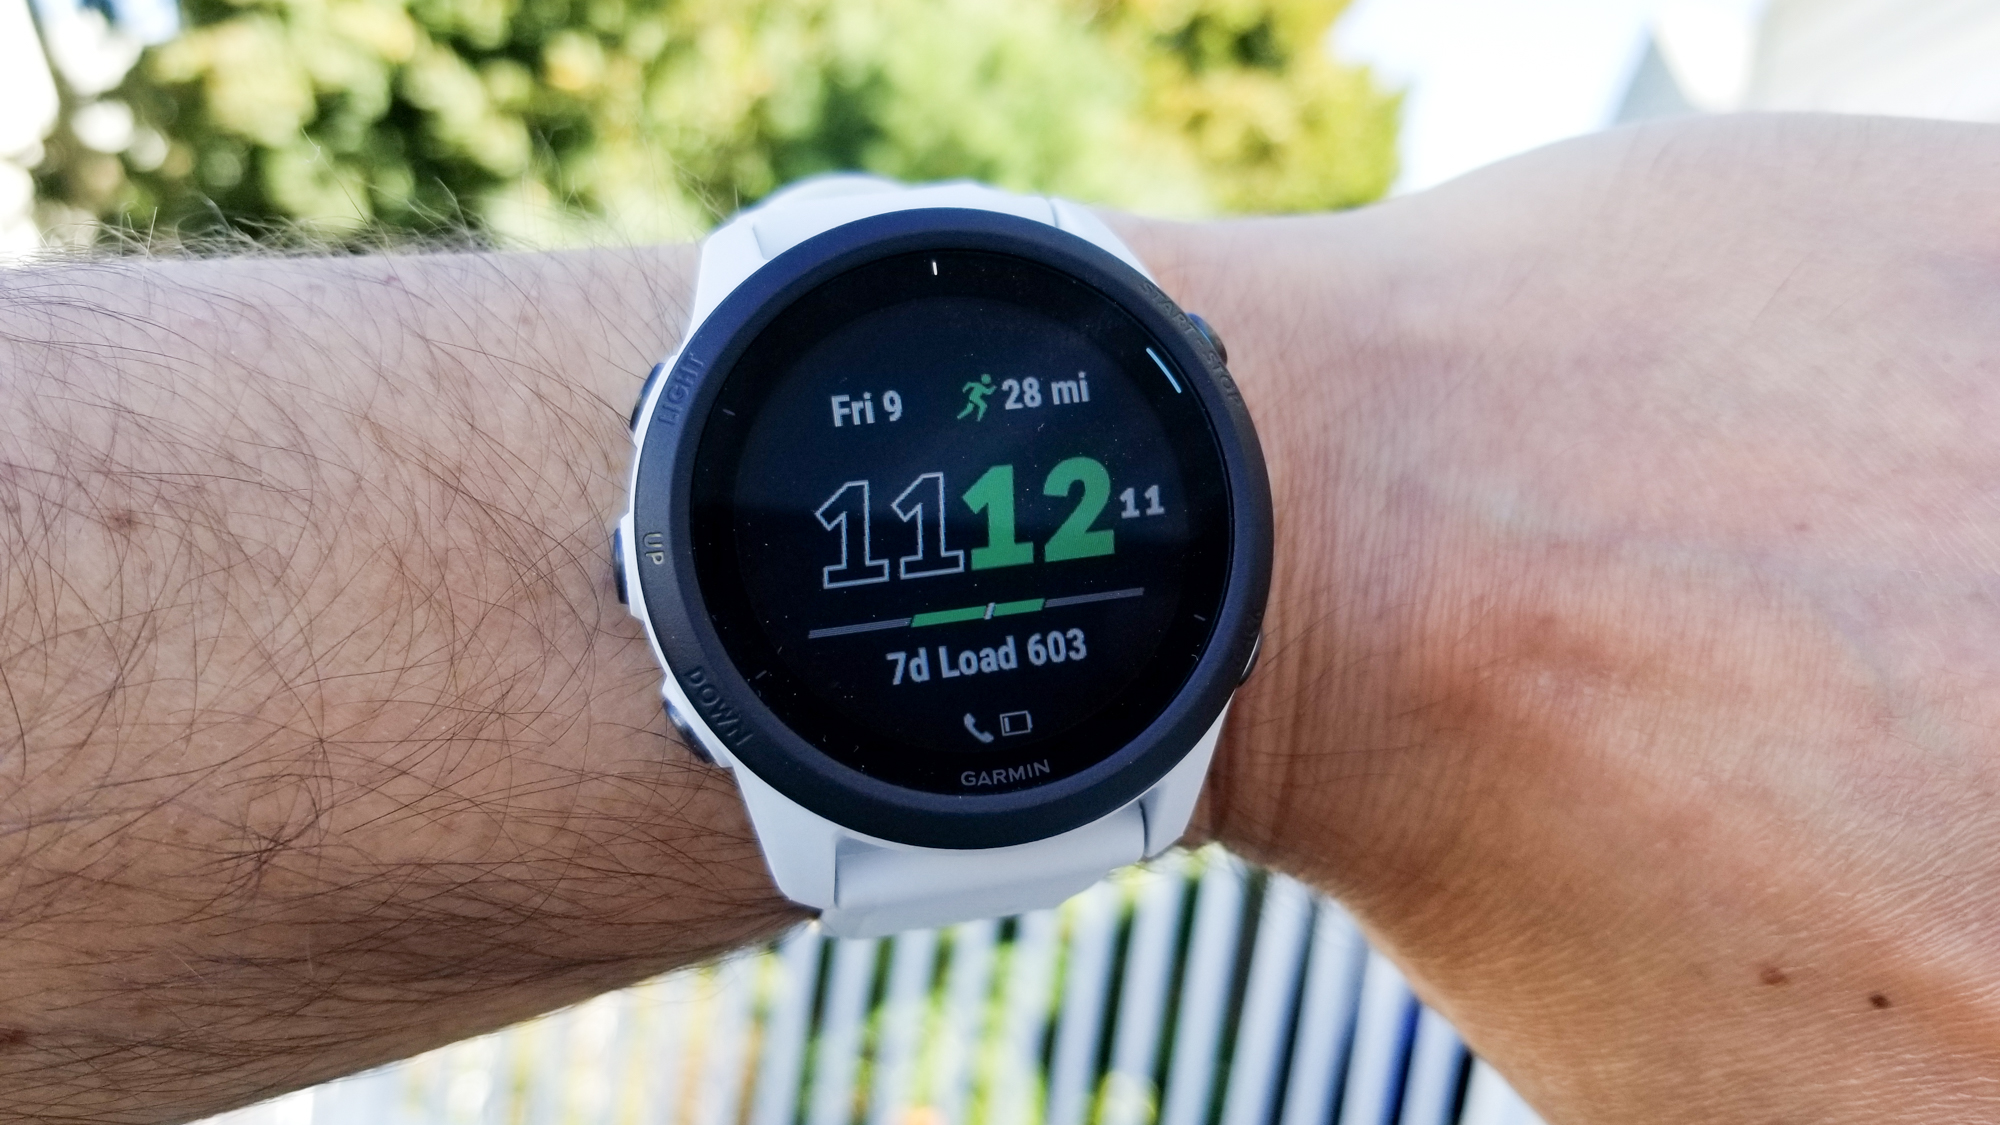 Review: The Garmin Forerunner 745 is a very well-rounded fitness